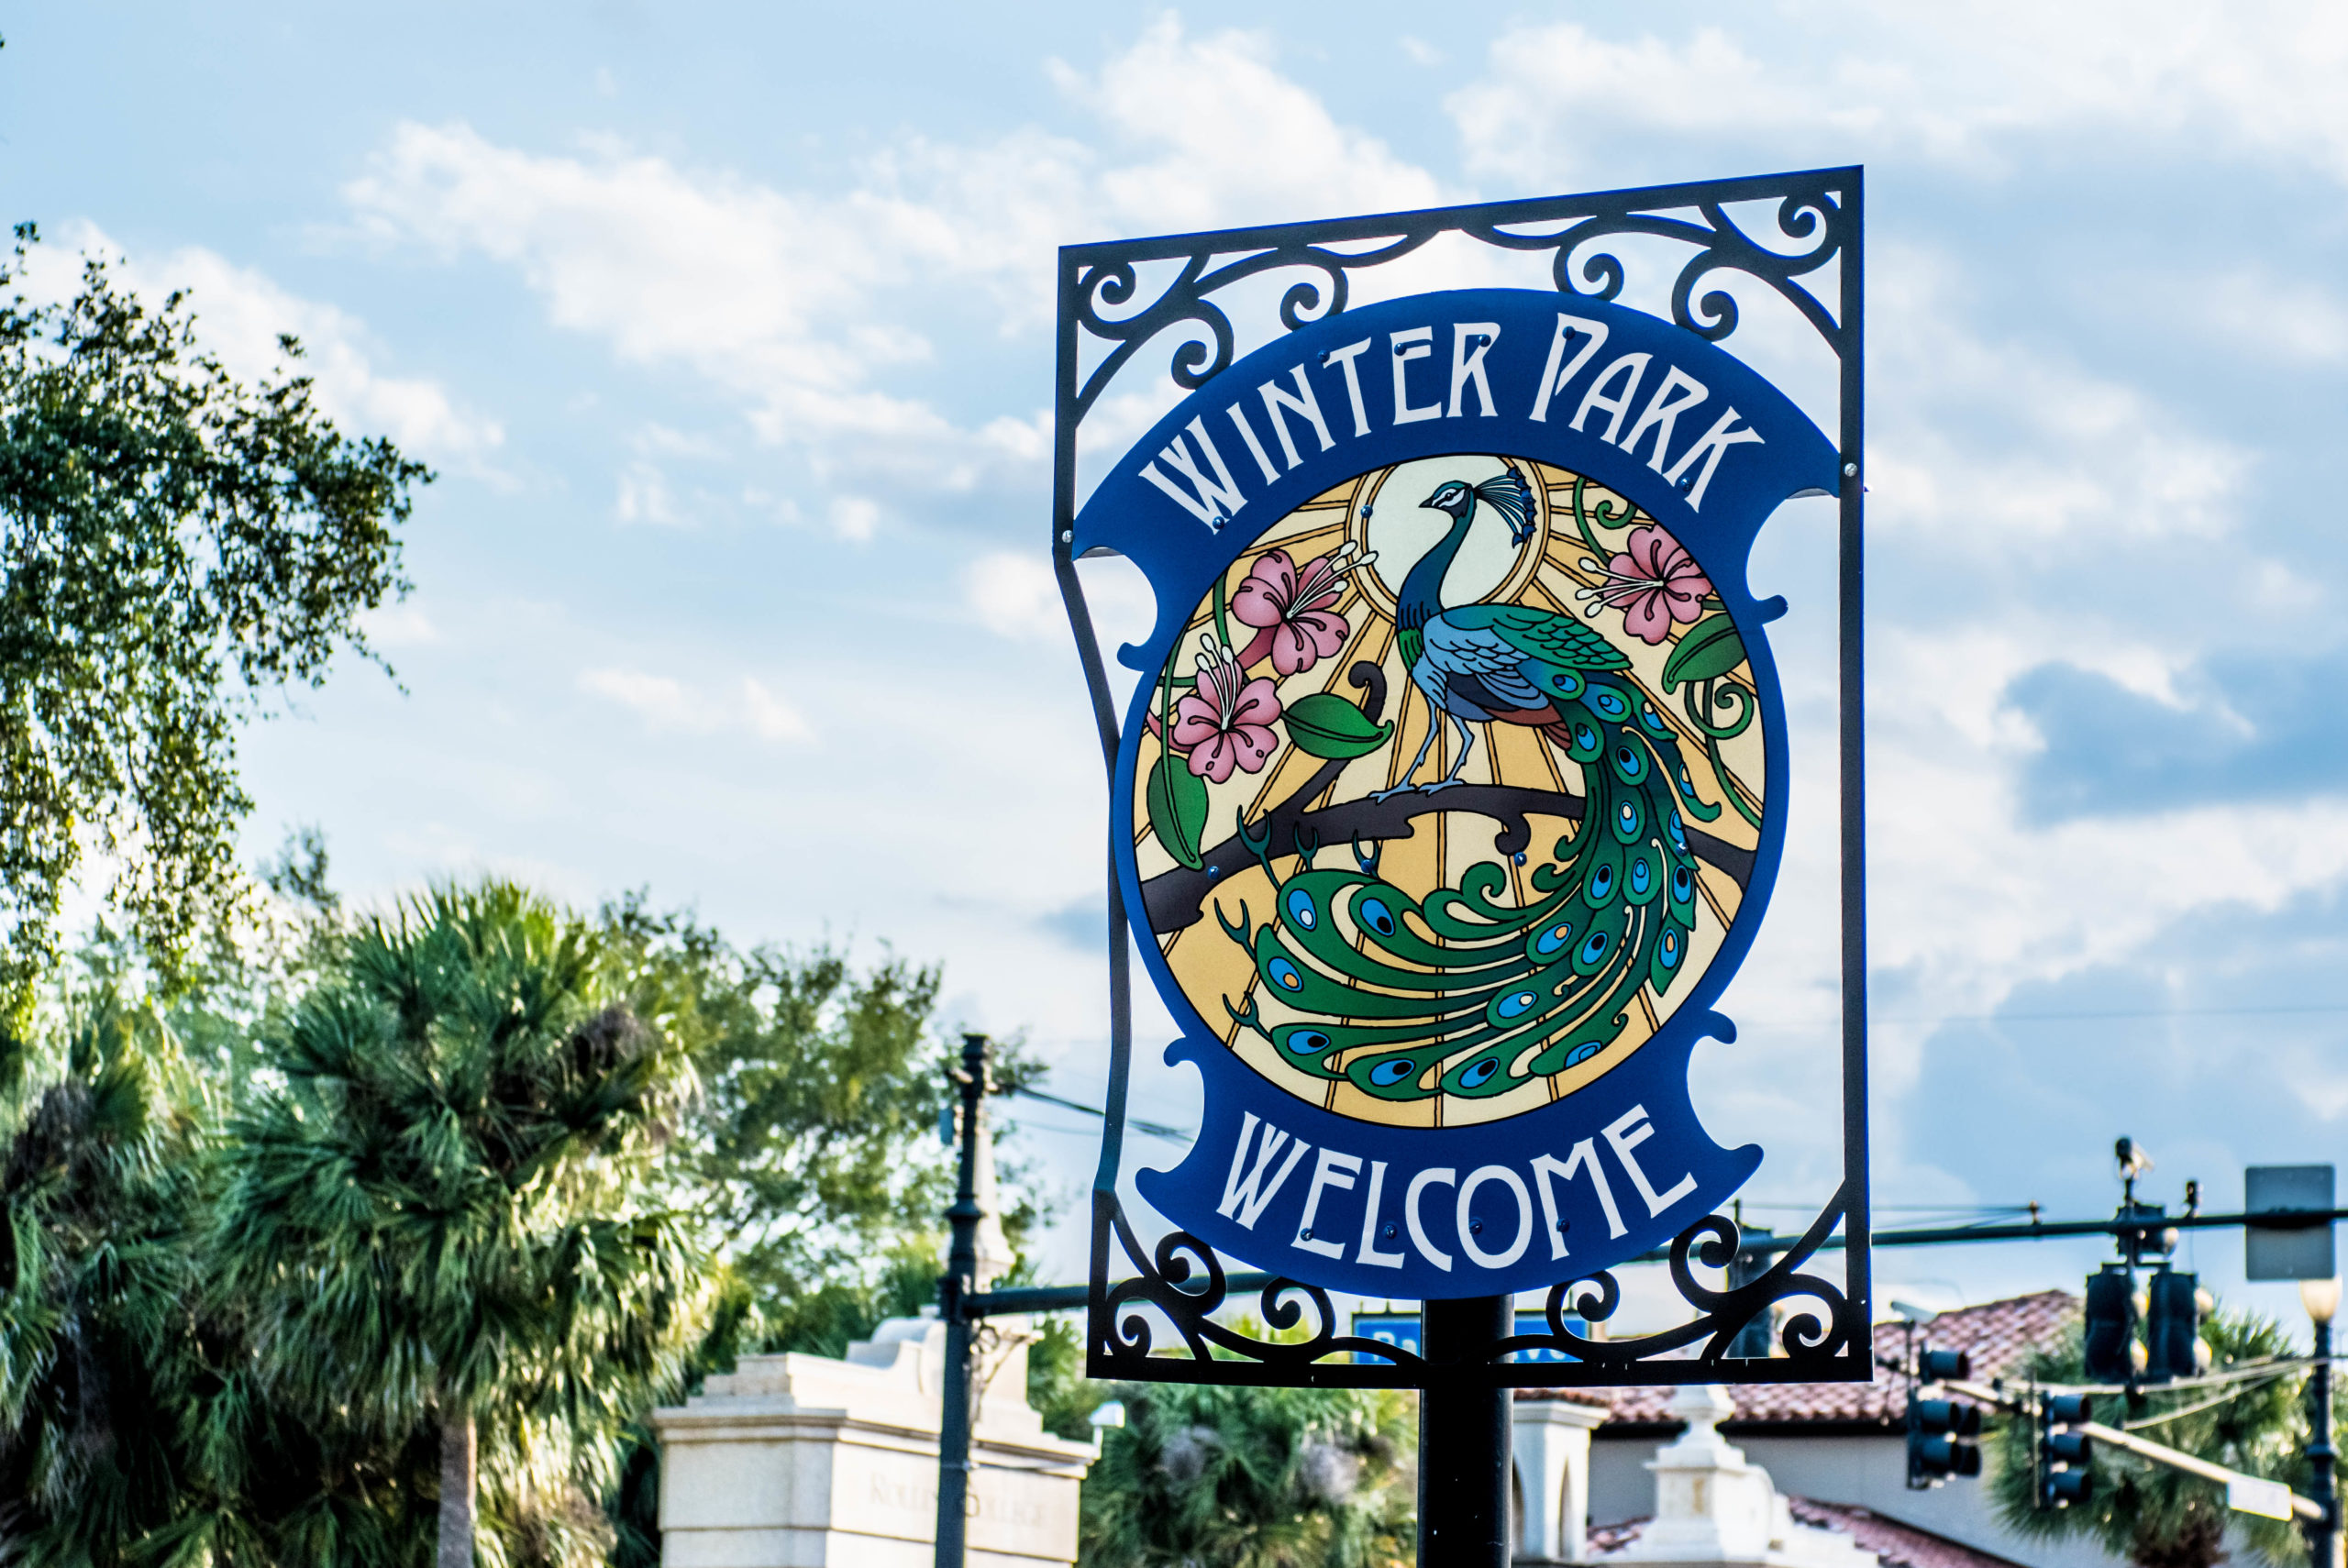 Winter Park Welcome sign.